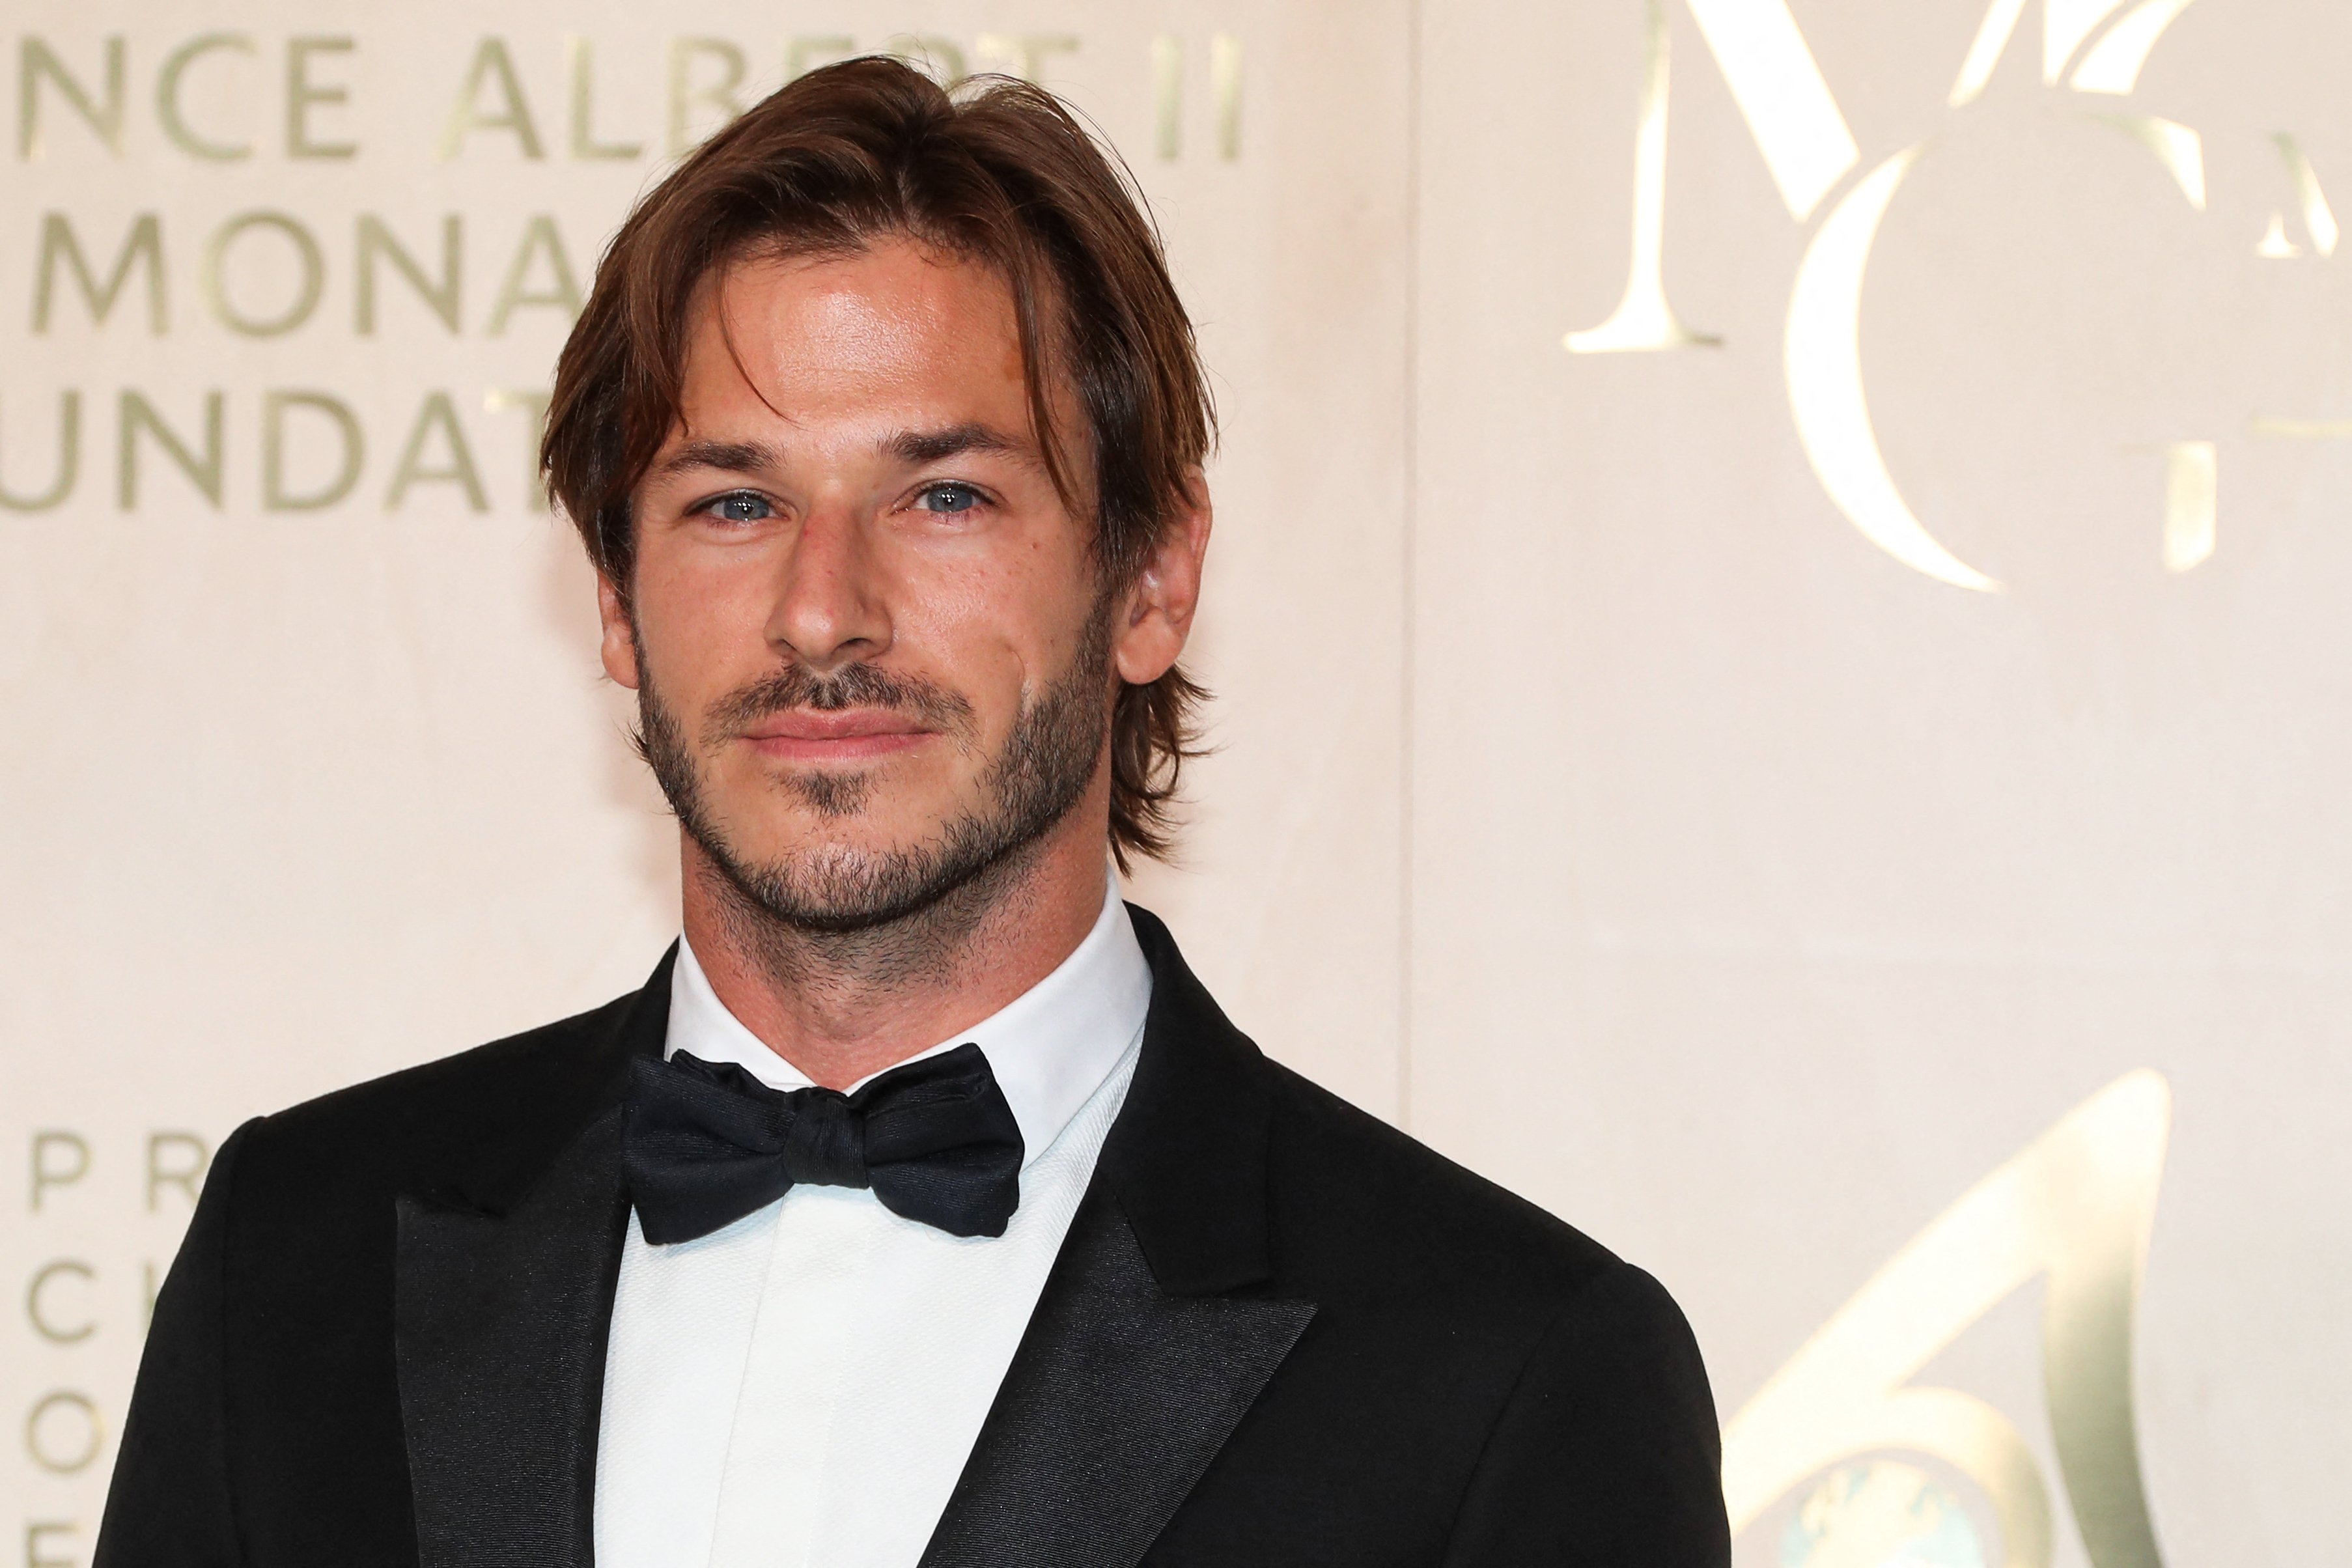 Gaspard Ulliel during the photocall ahead of the 2021 Monte-Carlo Gala for Planetary Health, 2021. | Photo: Getty Images